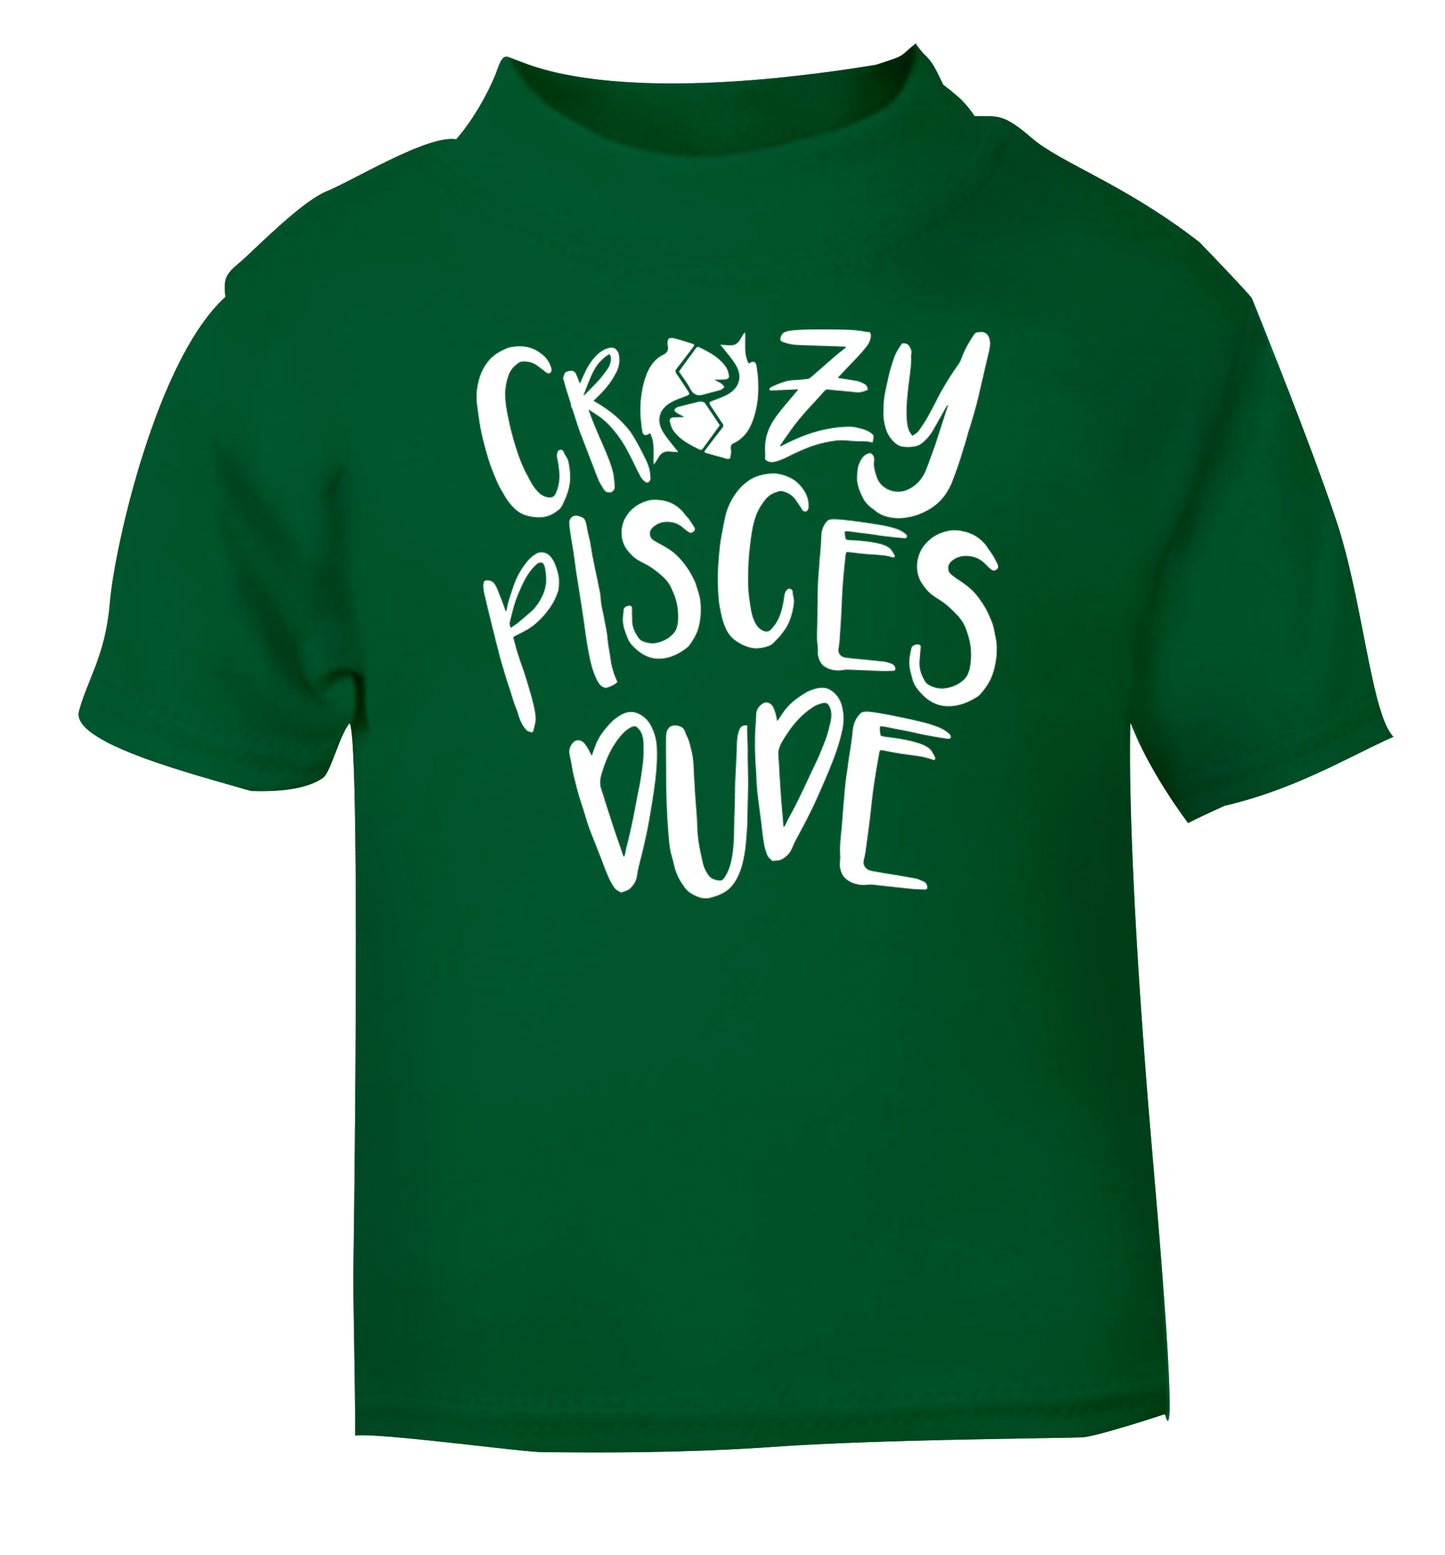 Crazy pisces dude green Baby Toddler Tshirt 2 Years